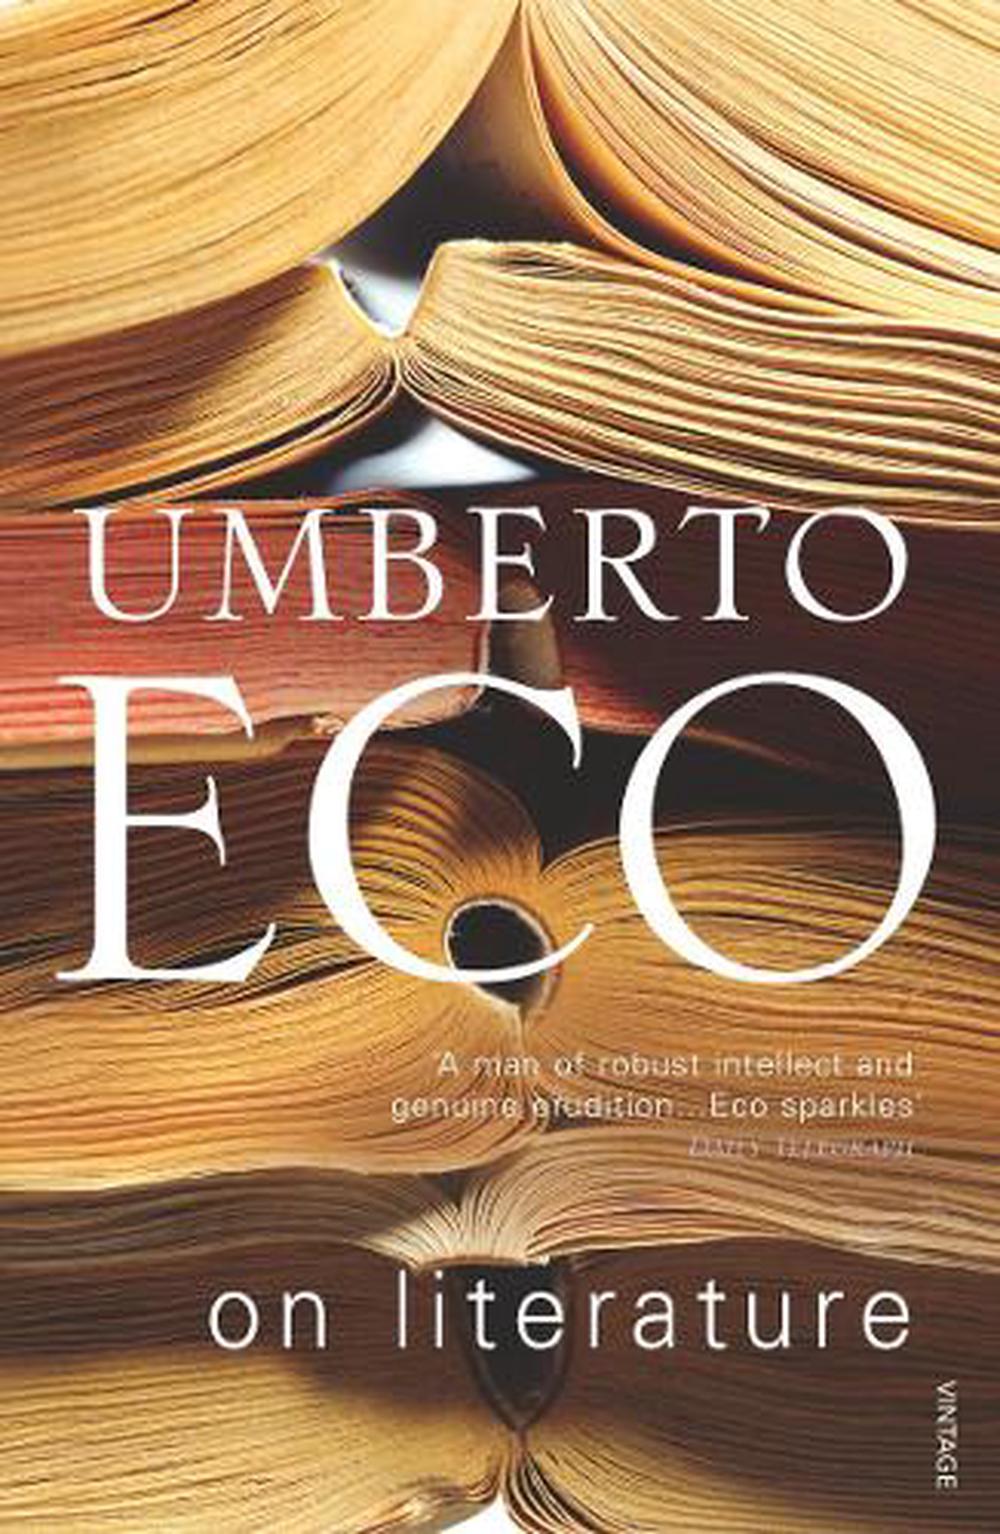 On Literature by Umberto Eco (English) Paperback Book Free Shipping! 9780099453949 eBay